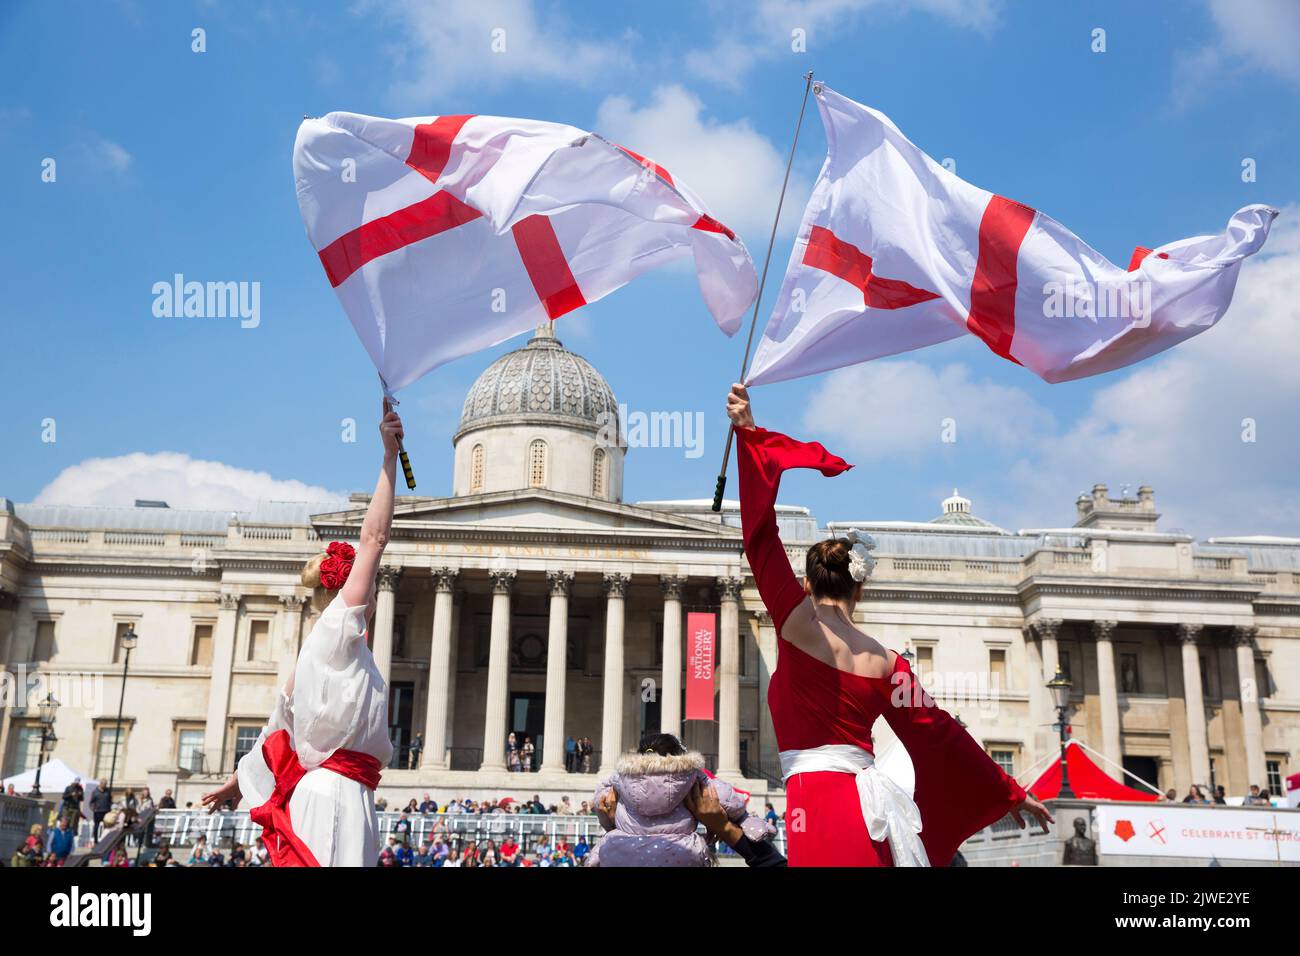 People watch acrobatic performances as they gather for St George’s Day celebrations in Trafalgar Square, central London. Stock Photo